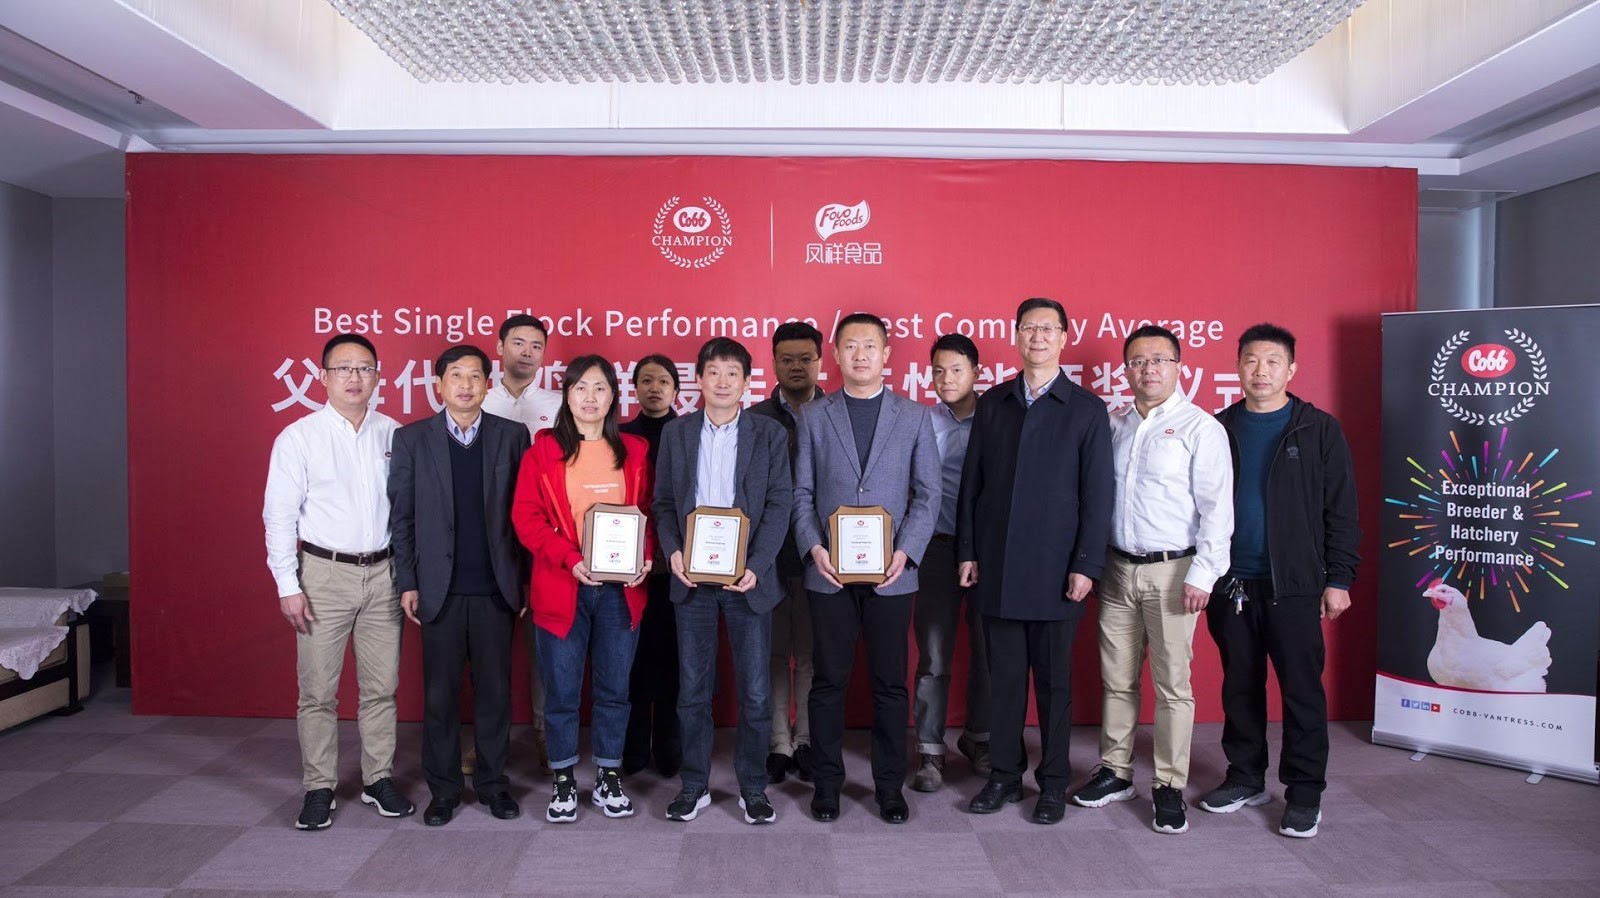 Shandong Fengxiang Team receiving the Cobb Champion Awards from Cobb Team.